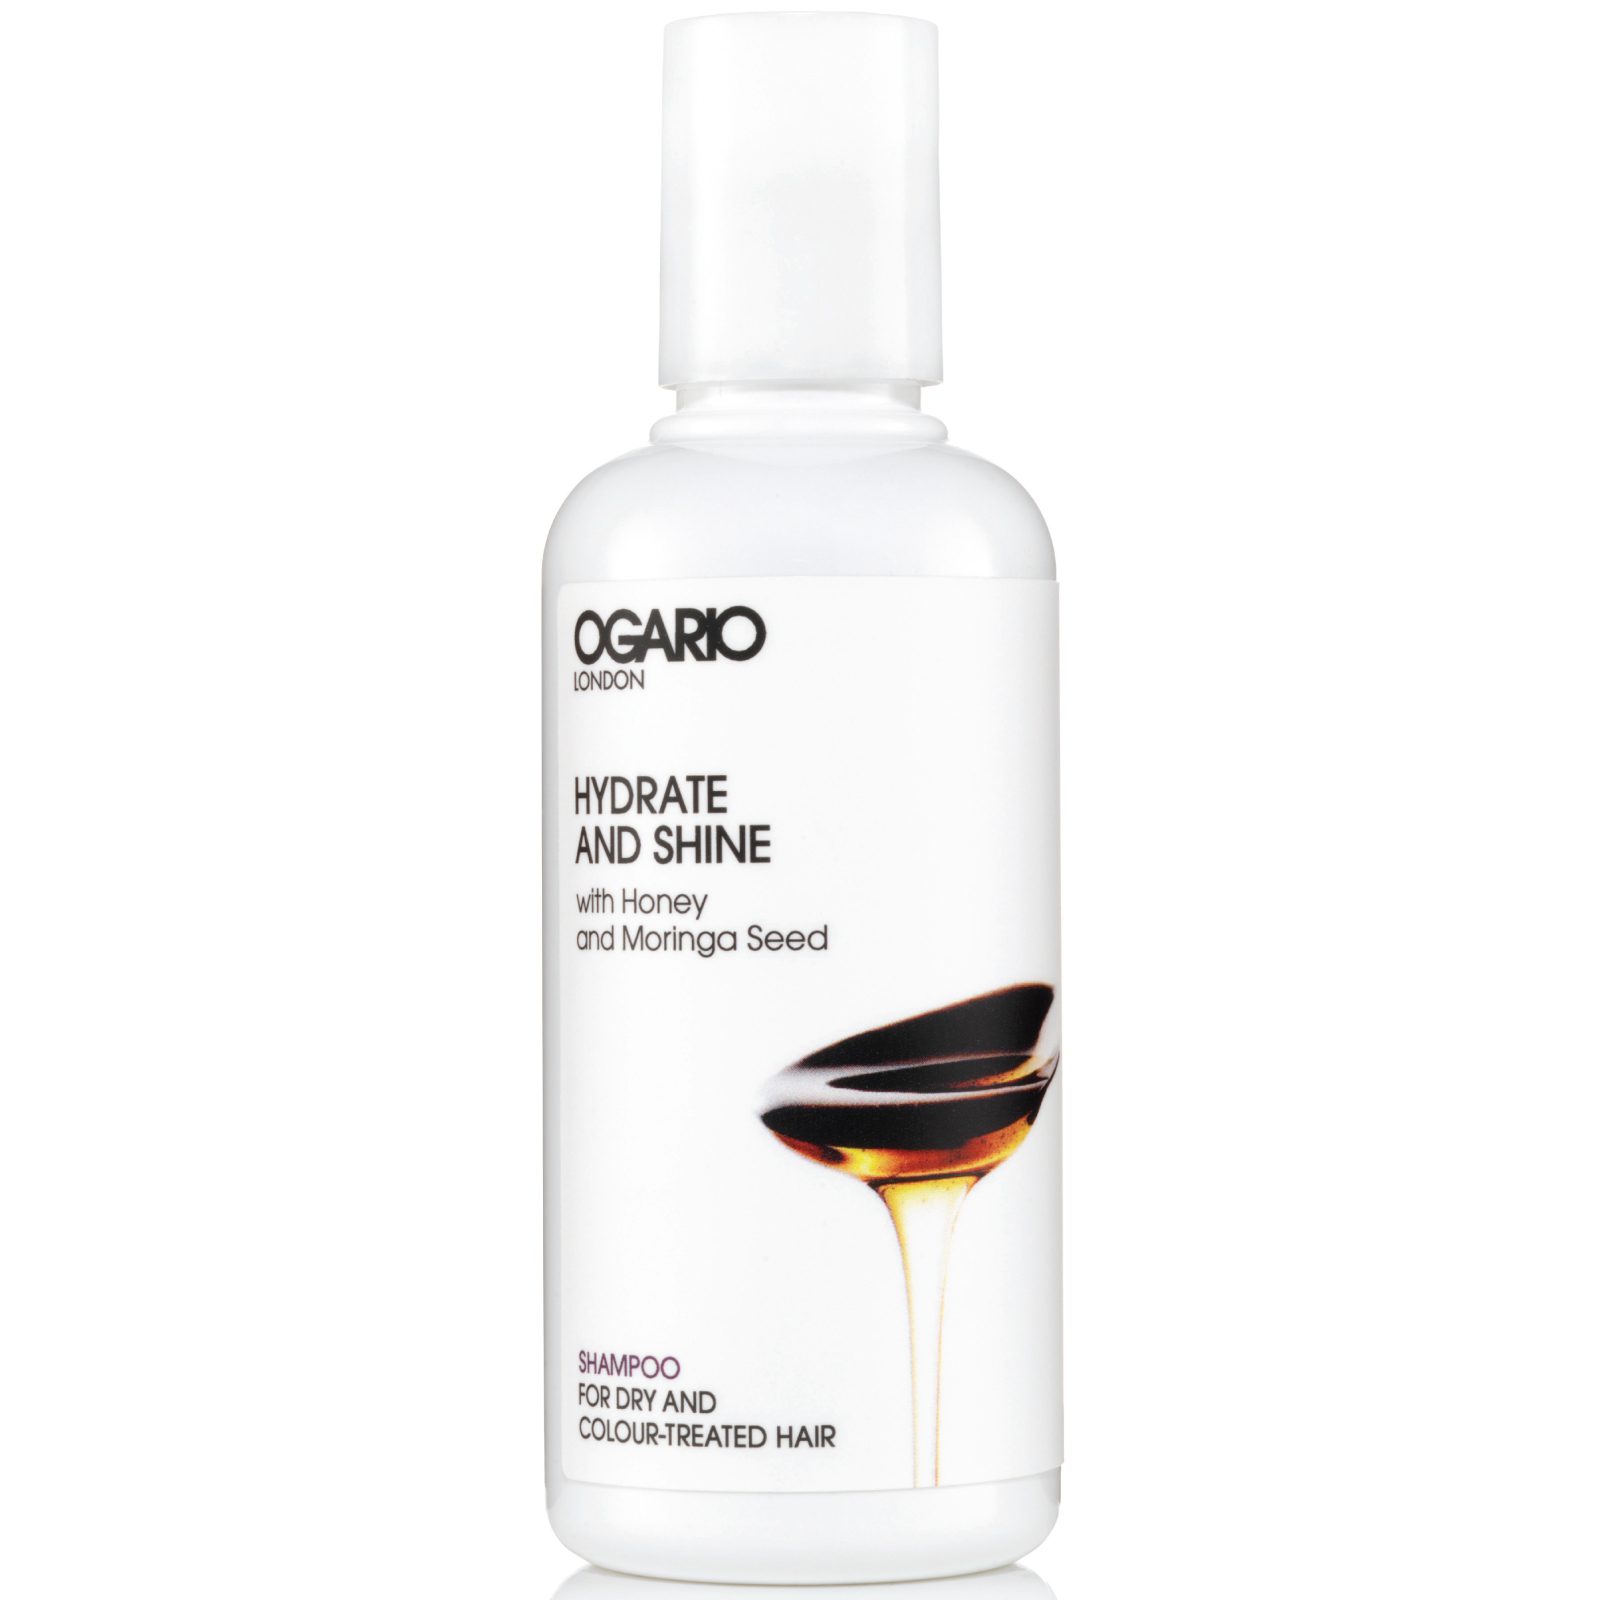 OGARIO Hydrate and Shine Travel Shampoo; Best for Dry, Damaged or Colour-Treated Hair